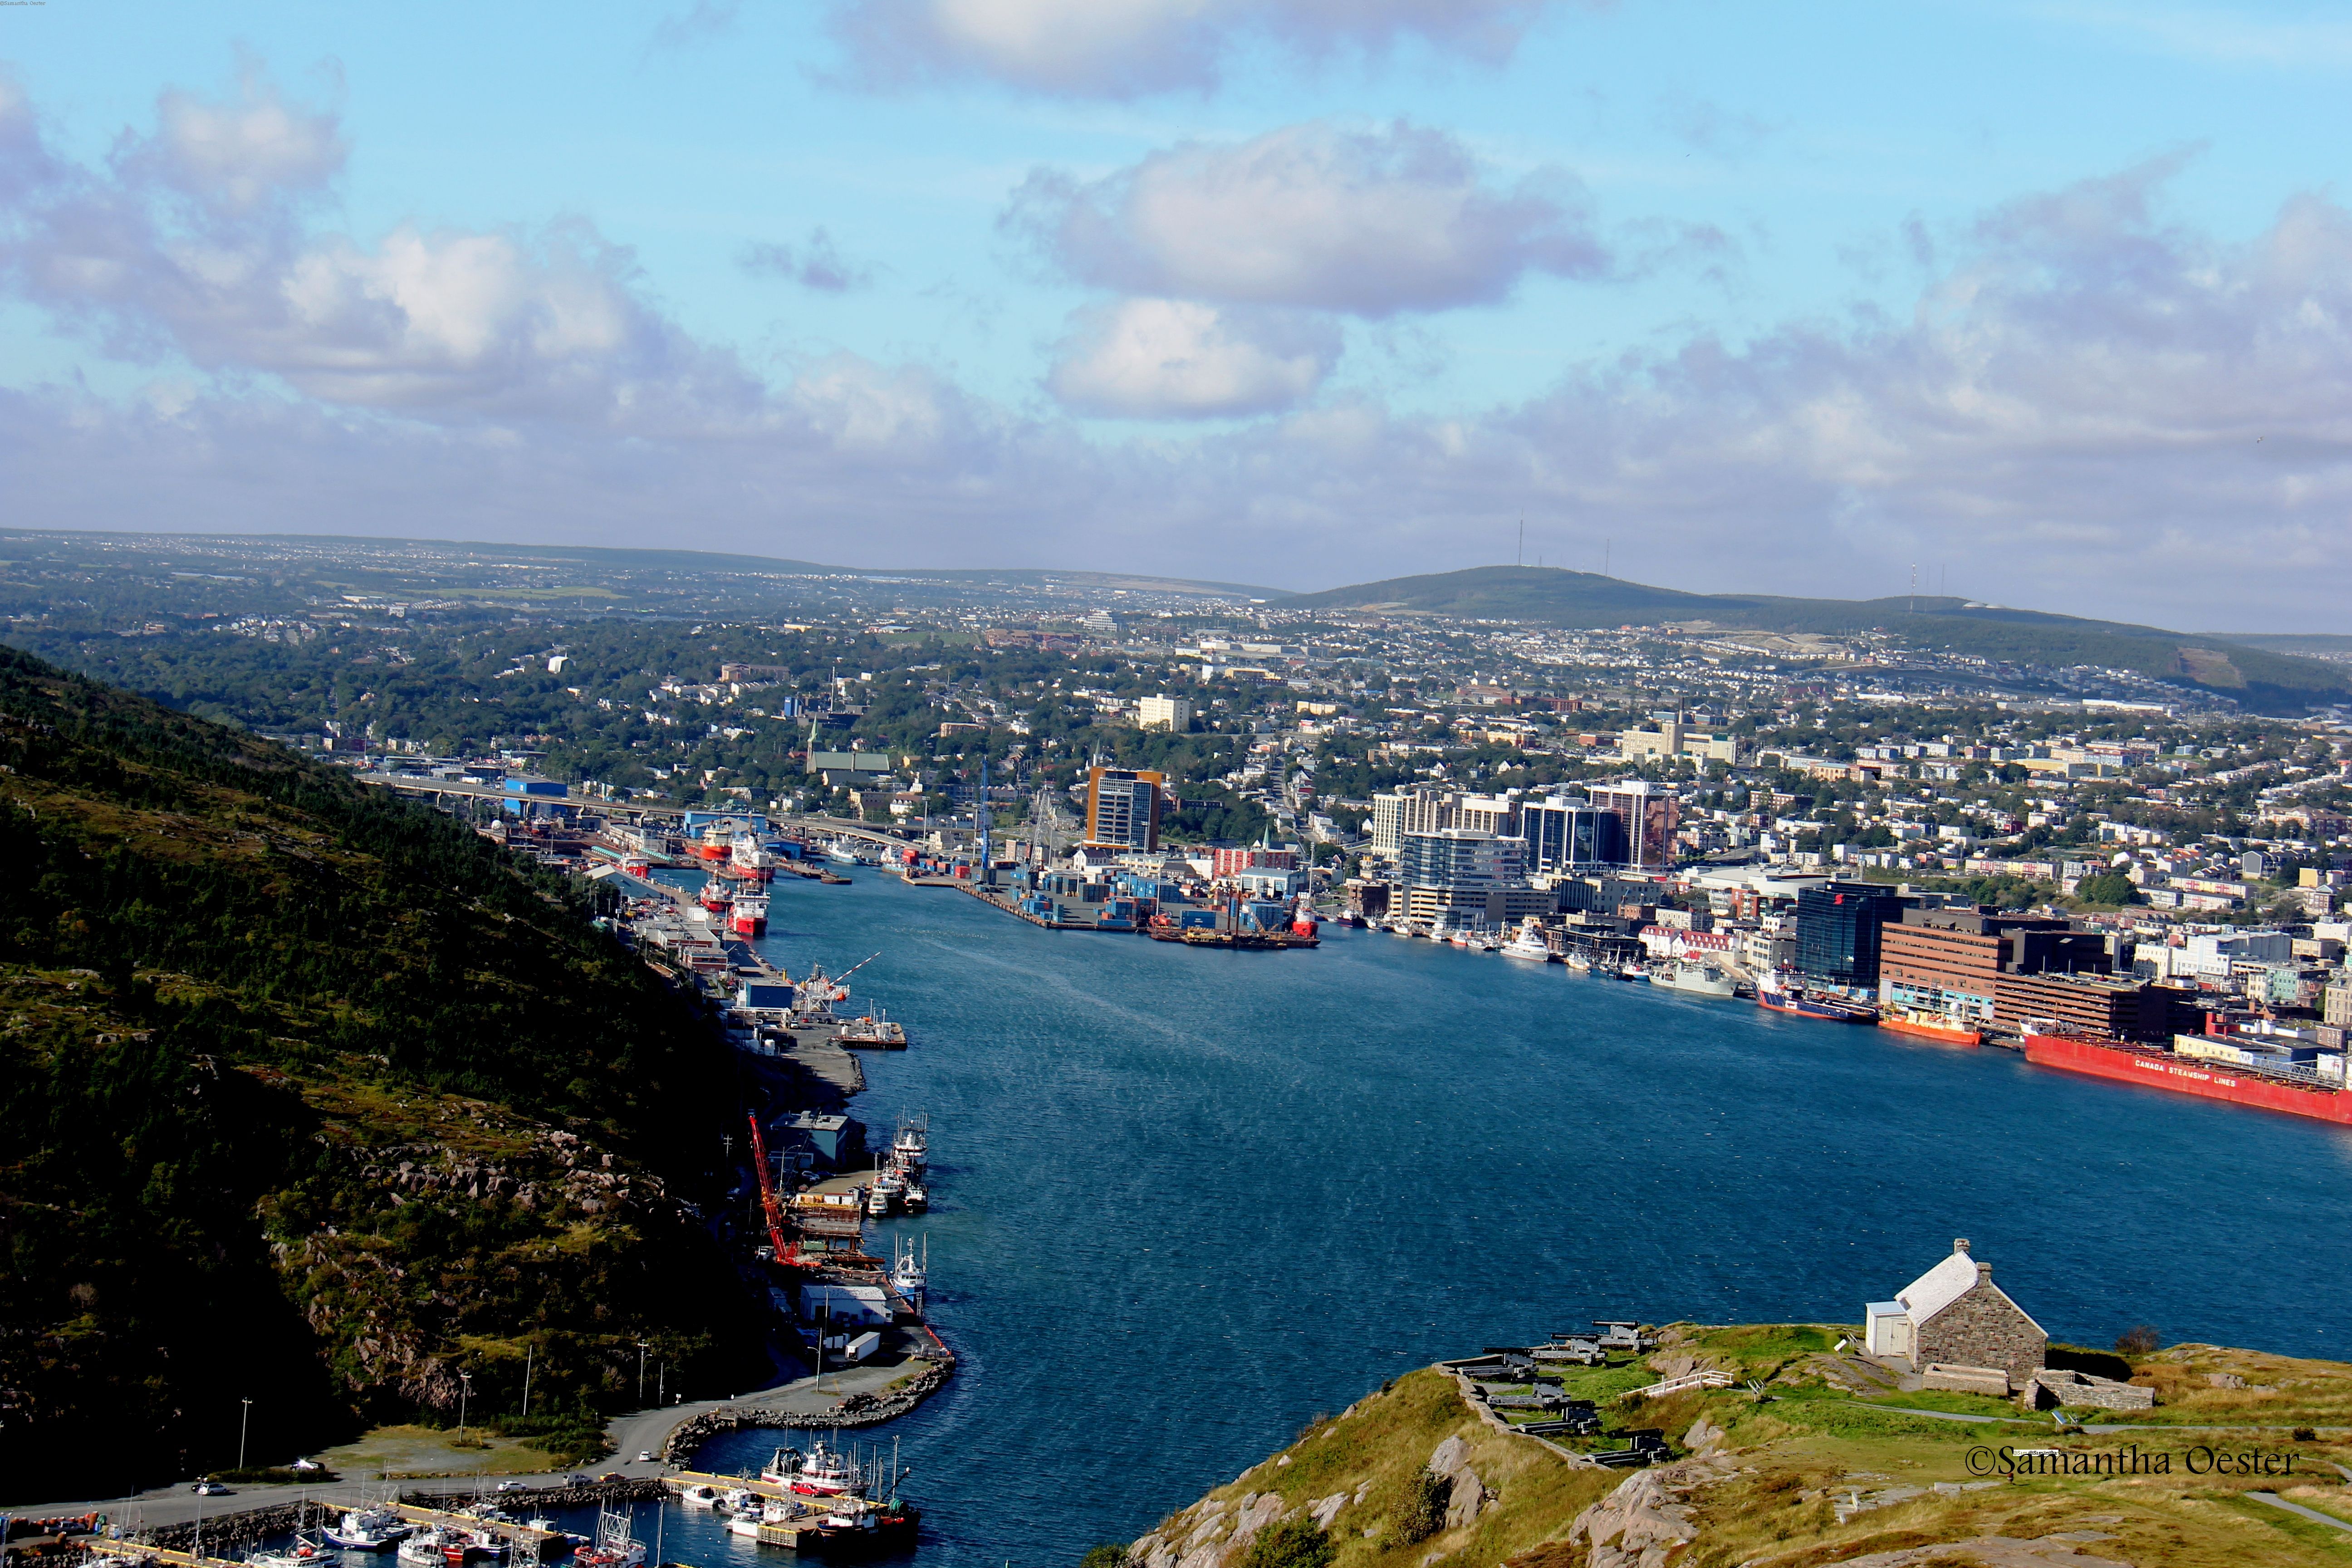 Photo View of St. John's, the capital of Newfoundland and Labrador, Canada